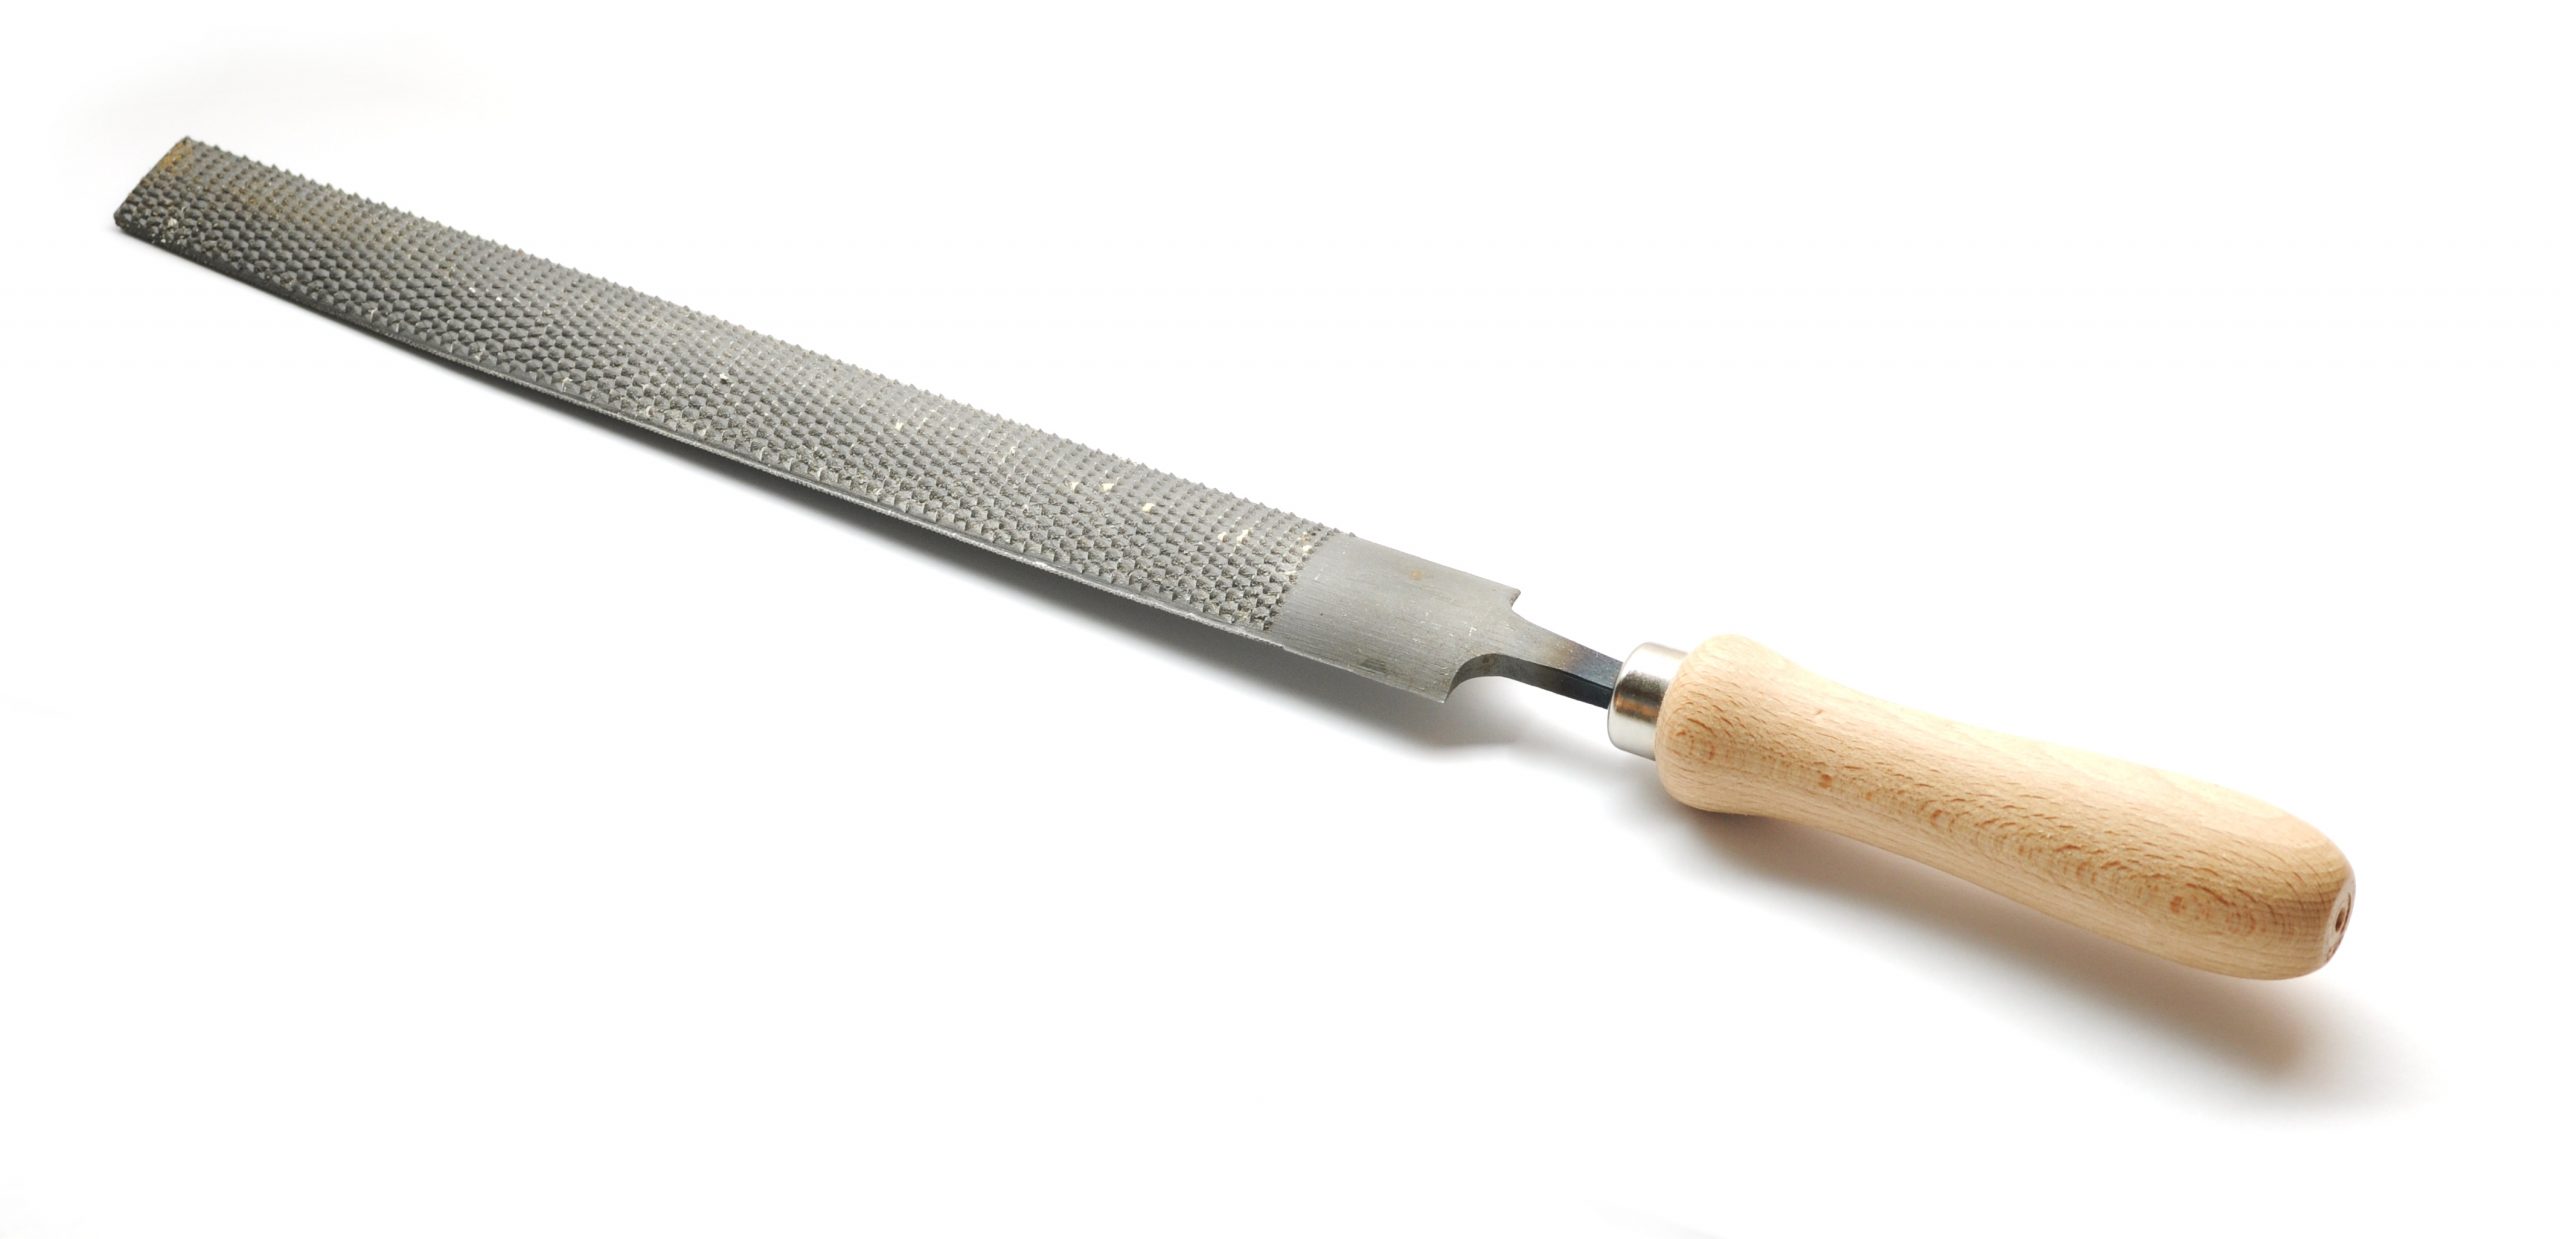 What is a rasping tool and how is it
used?